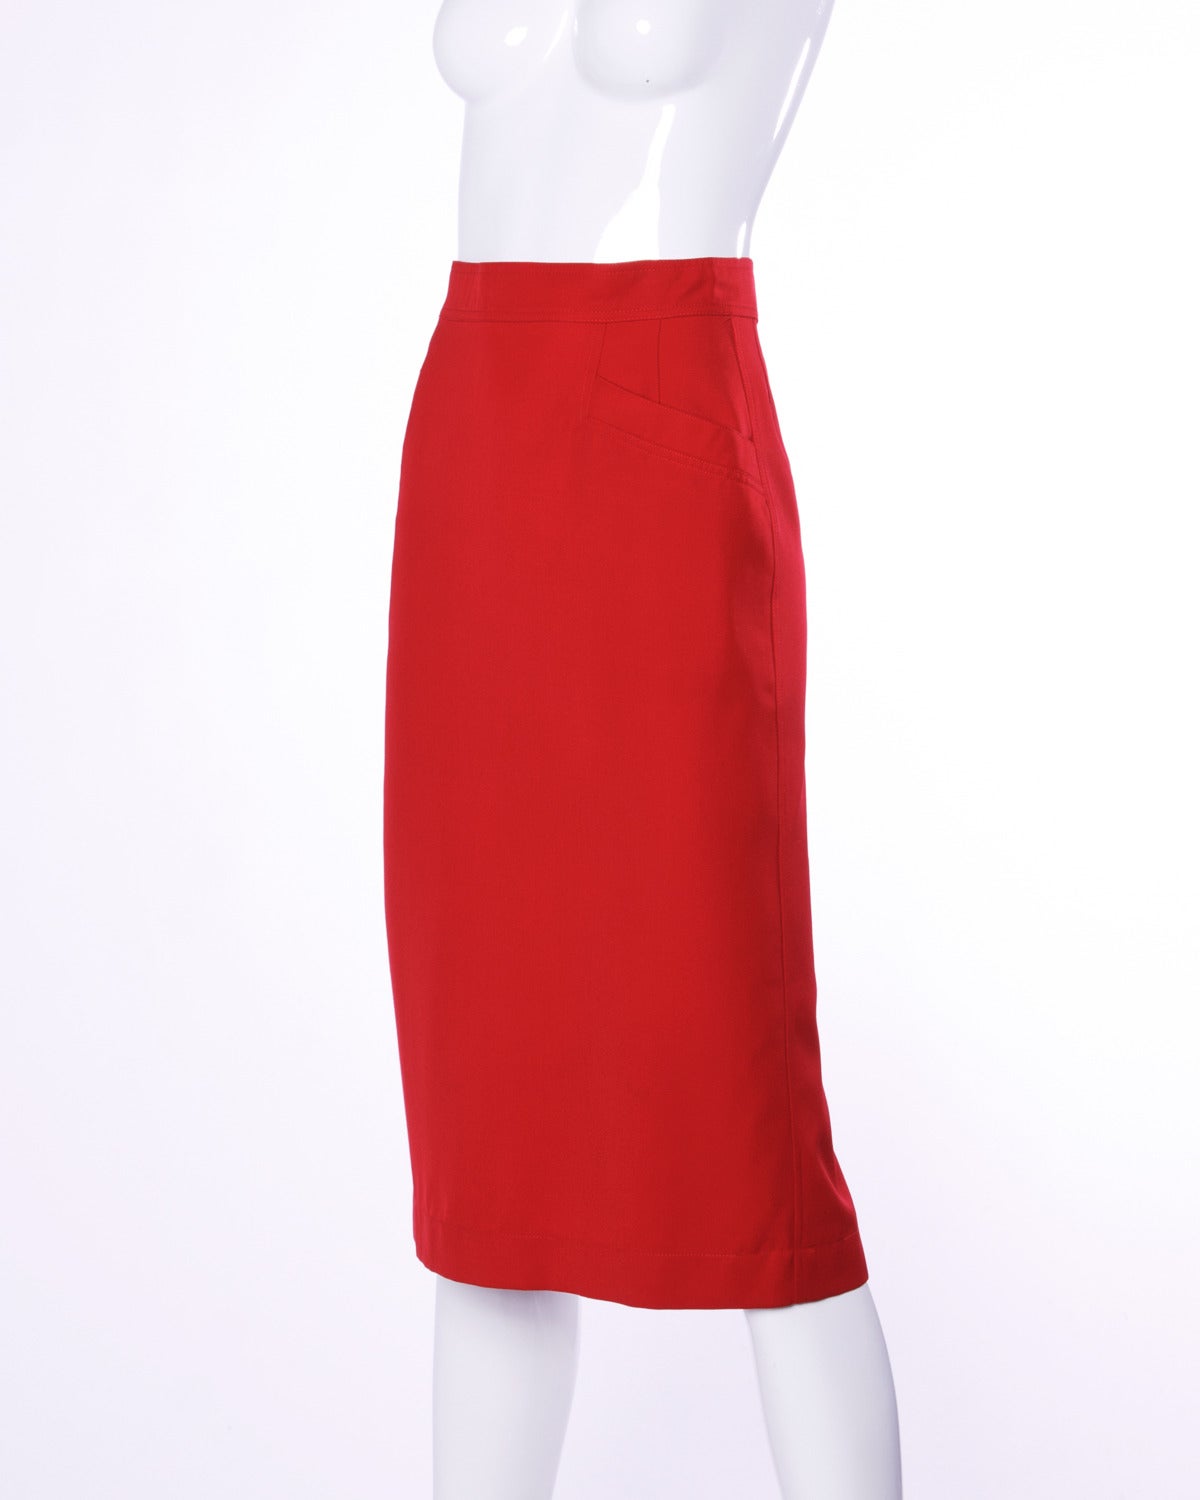 Vintage Krizia red wool pencil skirt. Simple and chic!

Details:

Fully Lined
Front Pockets
Back Zip and Button Closure
Marked Size: 40
Color: Candy Apple Red
Fabric: Wool
Label: Krizia

Measurements:

Waist: 26"
Hips: